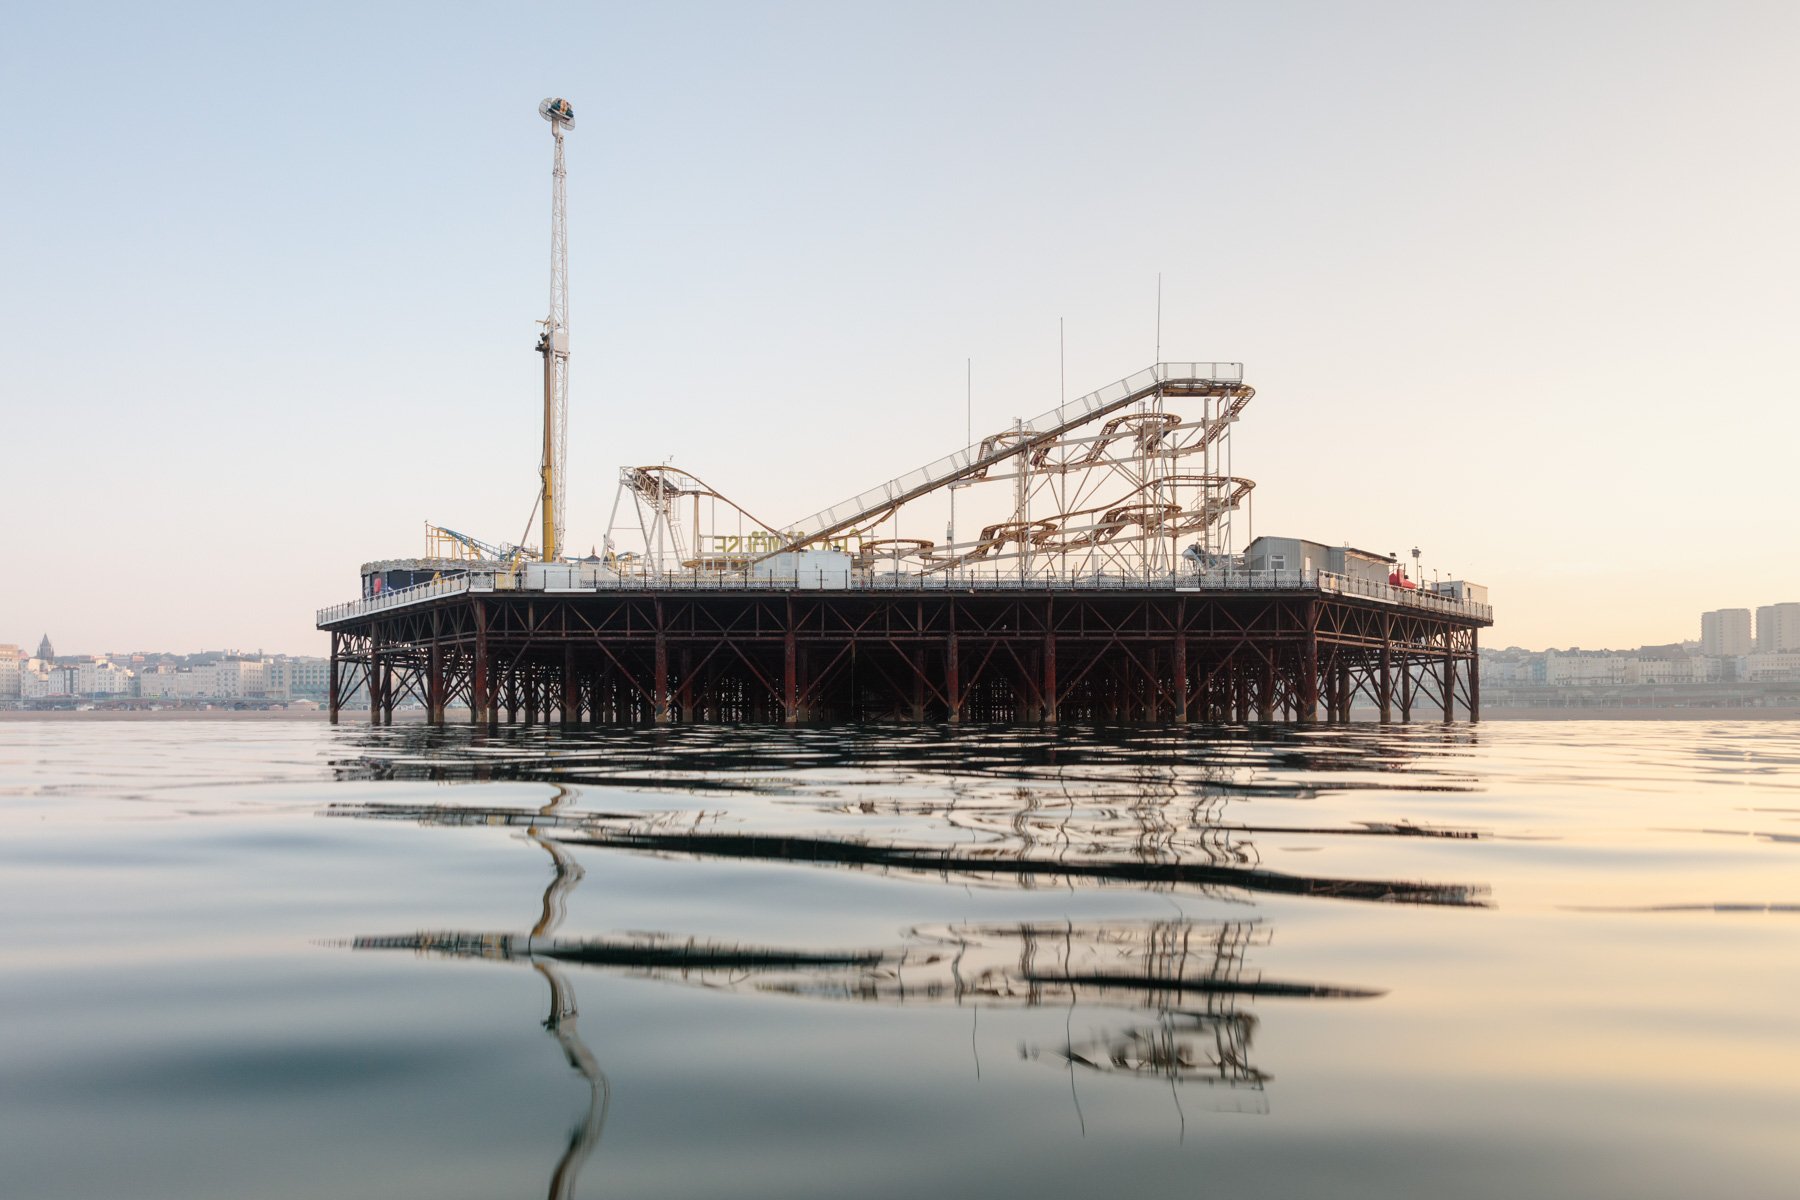 Three ways to see the Palace Pier (with no admission fee)...